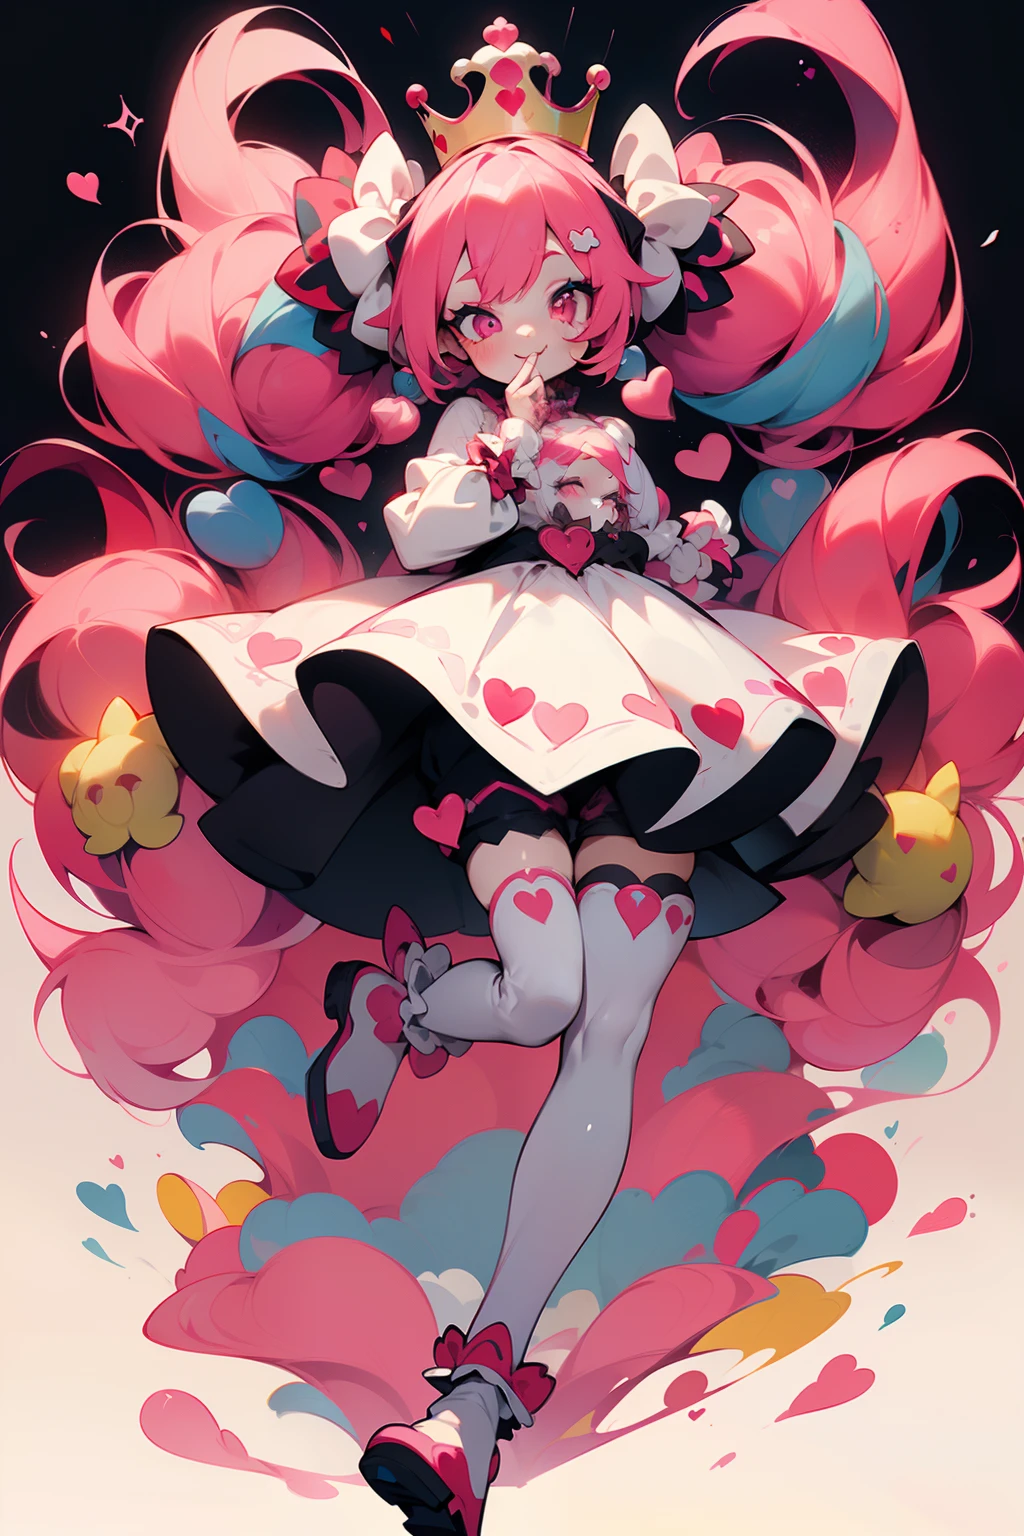 crazy cloud haired girl, pink hair, full body picture, pink eyes, heart shaped pupils, insane smile, blood splatter, 1GIRL, insane girl in long pink hair, crown, princess bubblegum style, finely detailed, (best quality), (intricate details), cute style, , jester style, multicolored, ((long pink messiest hair in pigtails)), best quality, ((long sleeve shirt and shorts)), ((red and white clothes)), ((jester style clothes)), ((thigh high socks)), ((round eyes)), ((has jester makeup)), beautiful face, happy, cute face, pinup, perfect face, simple background portrait, clowh hear cards, bubble gums